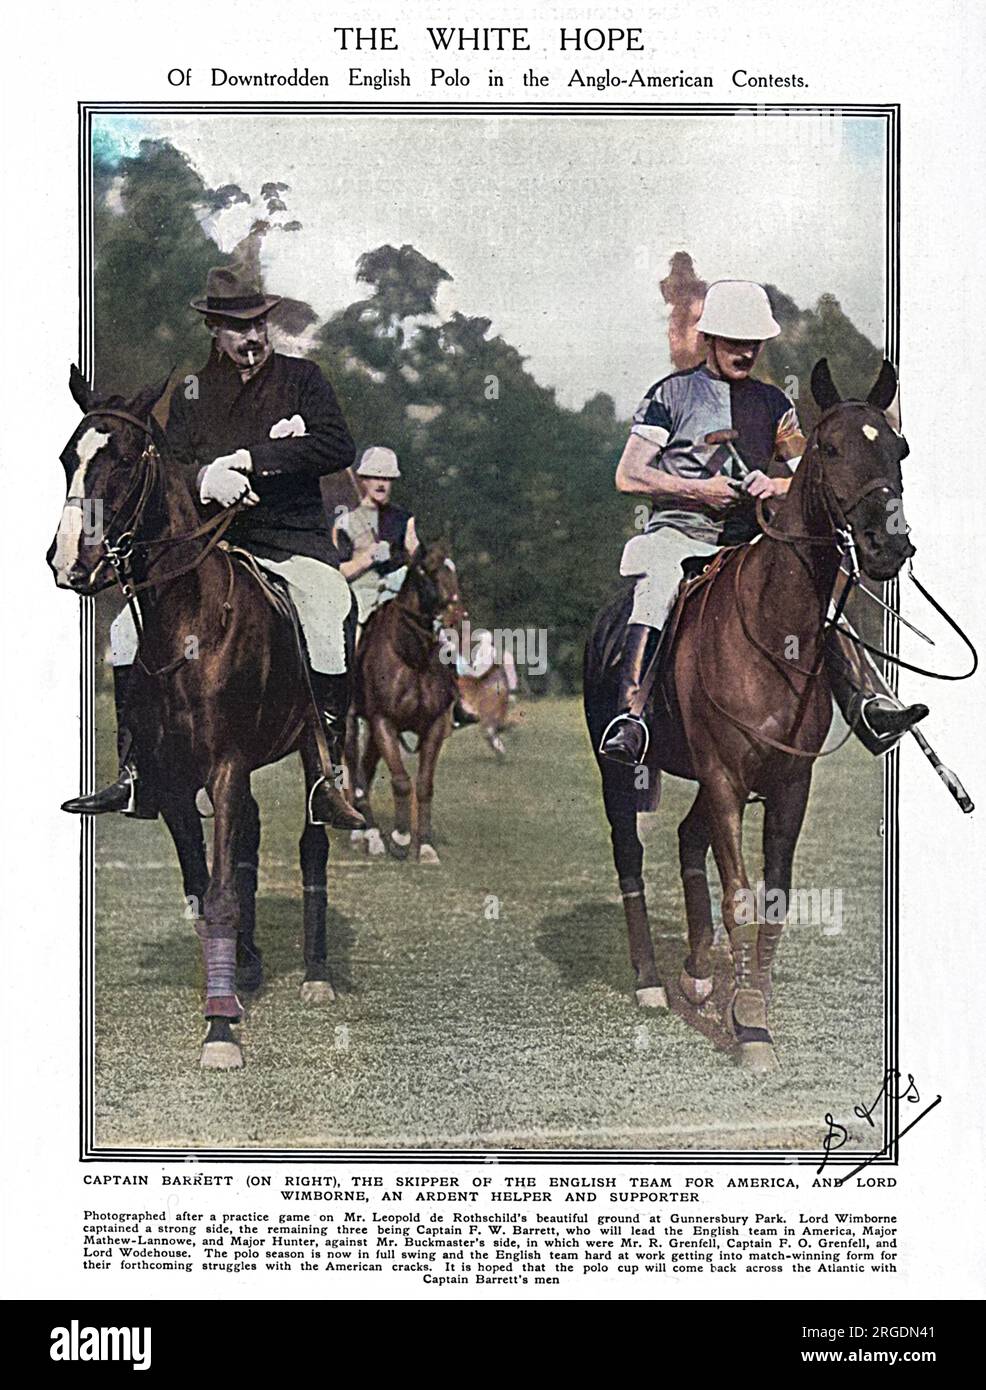 Captain Frederick Barrett, captain of the 1914 England polo team, pictured with Lord Wimborne, a supporter and helper of the team, at a practice game on Leopold de Rothschild's ground at Gunnersbury Park.  The Tatler entitled the image, 'The White Hope - of downtrodden English polo in the Anglo-American contests.'  England had been beaten by America in the recent previous contests over the Westchester Cup, but in 1914, they achieved a historic and emphatic victory with the team of Captains Barrett, Cheape, Tomkinson and Lockett. Stock Photo